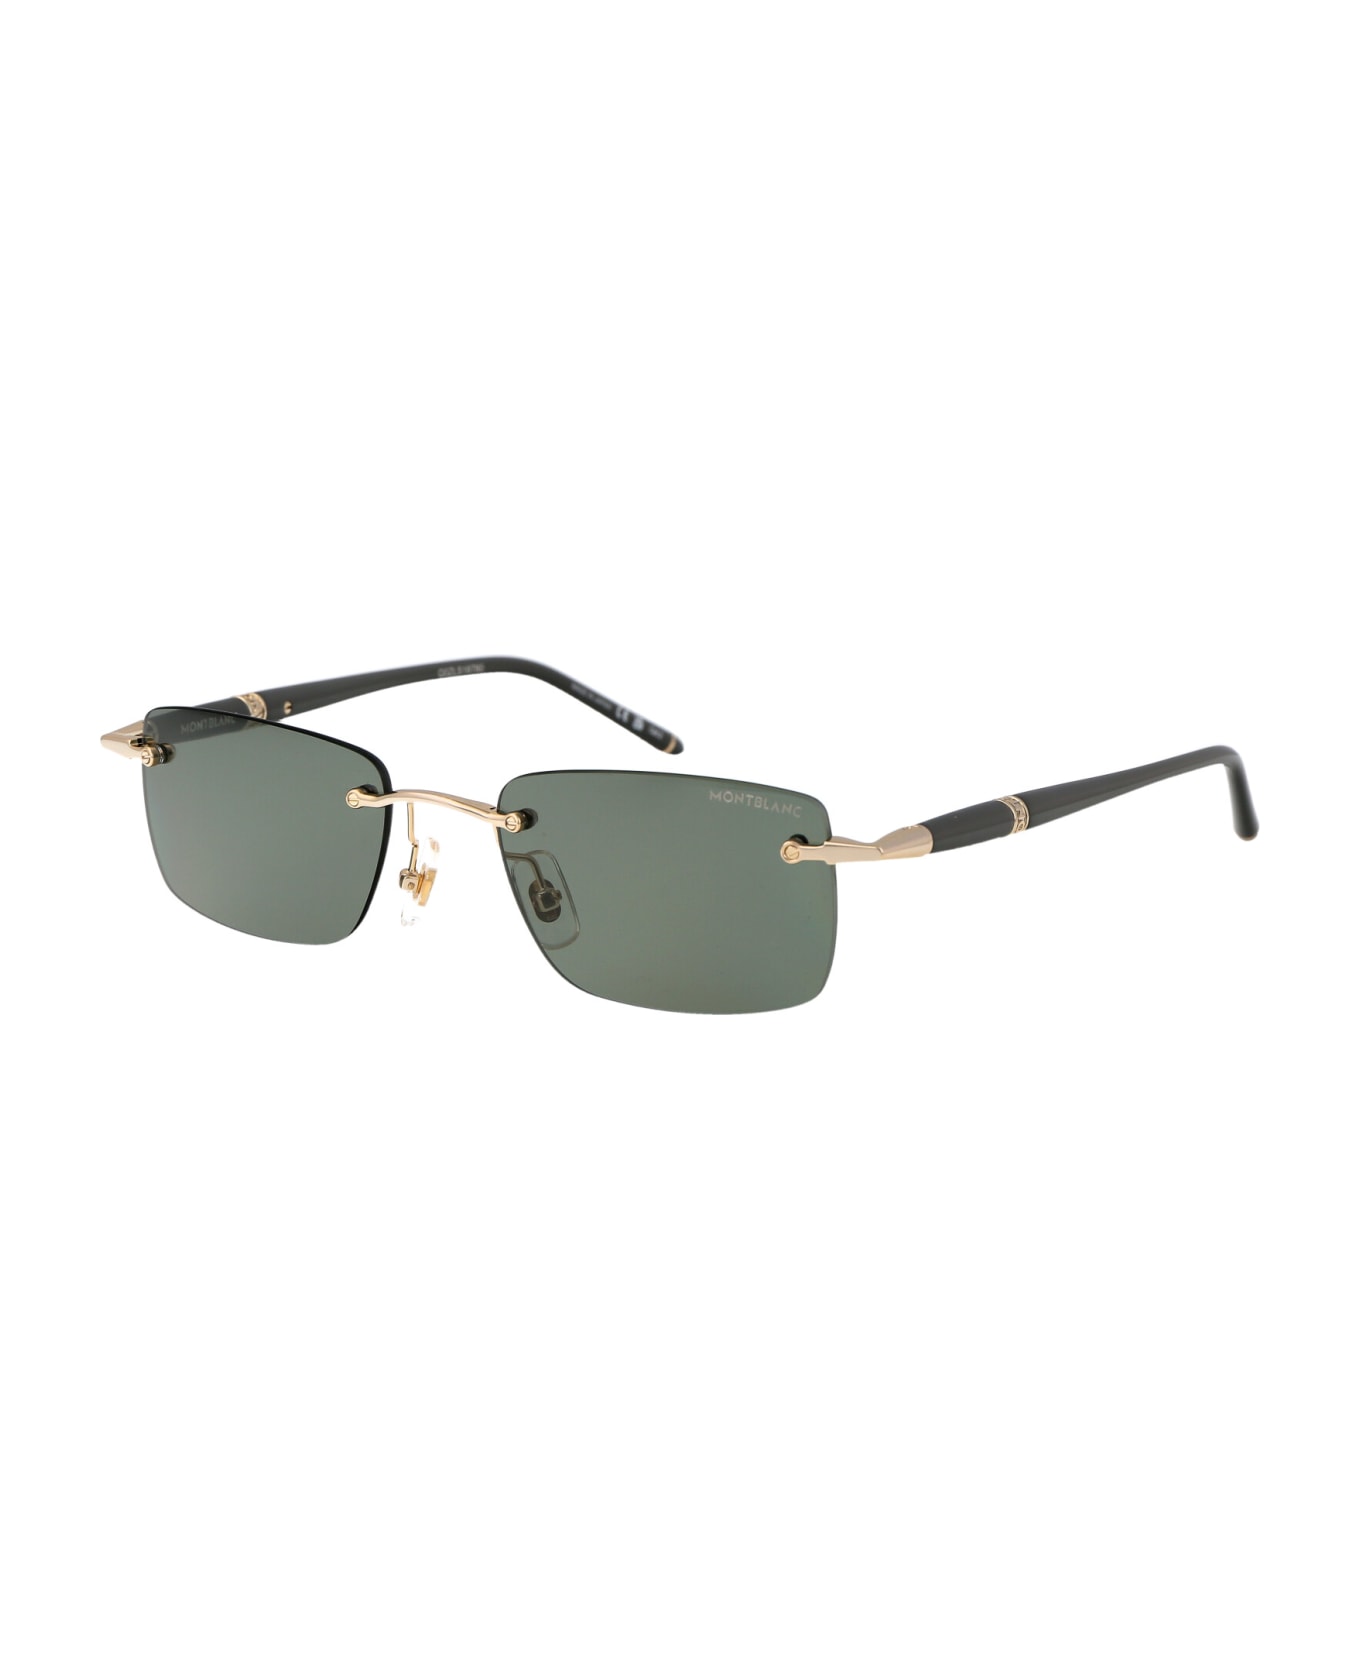 Montblanc Mb0344s Sunglasses - 005 GOLD GREY GREEN